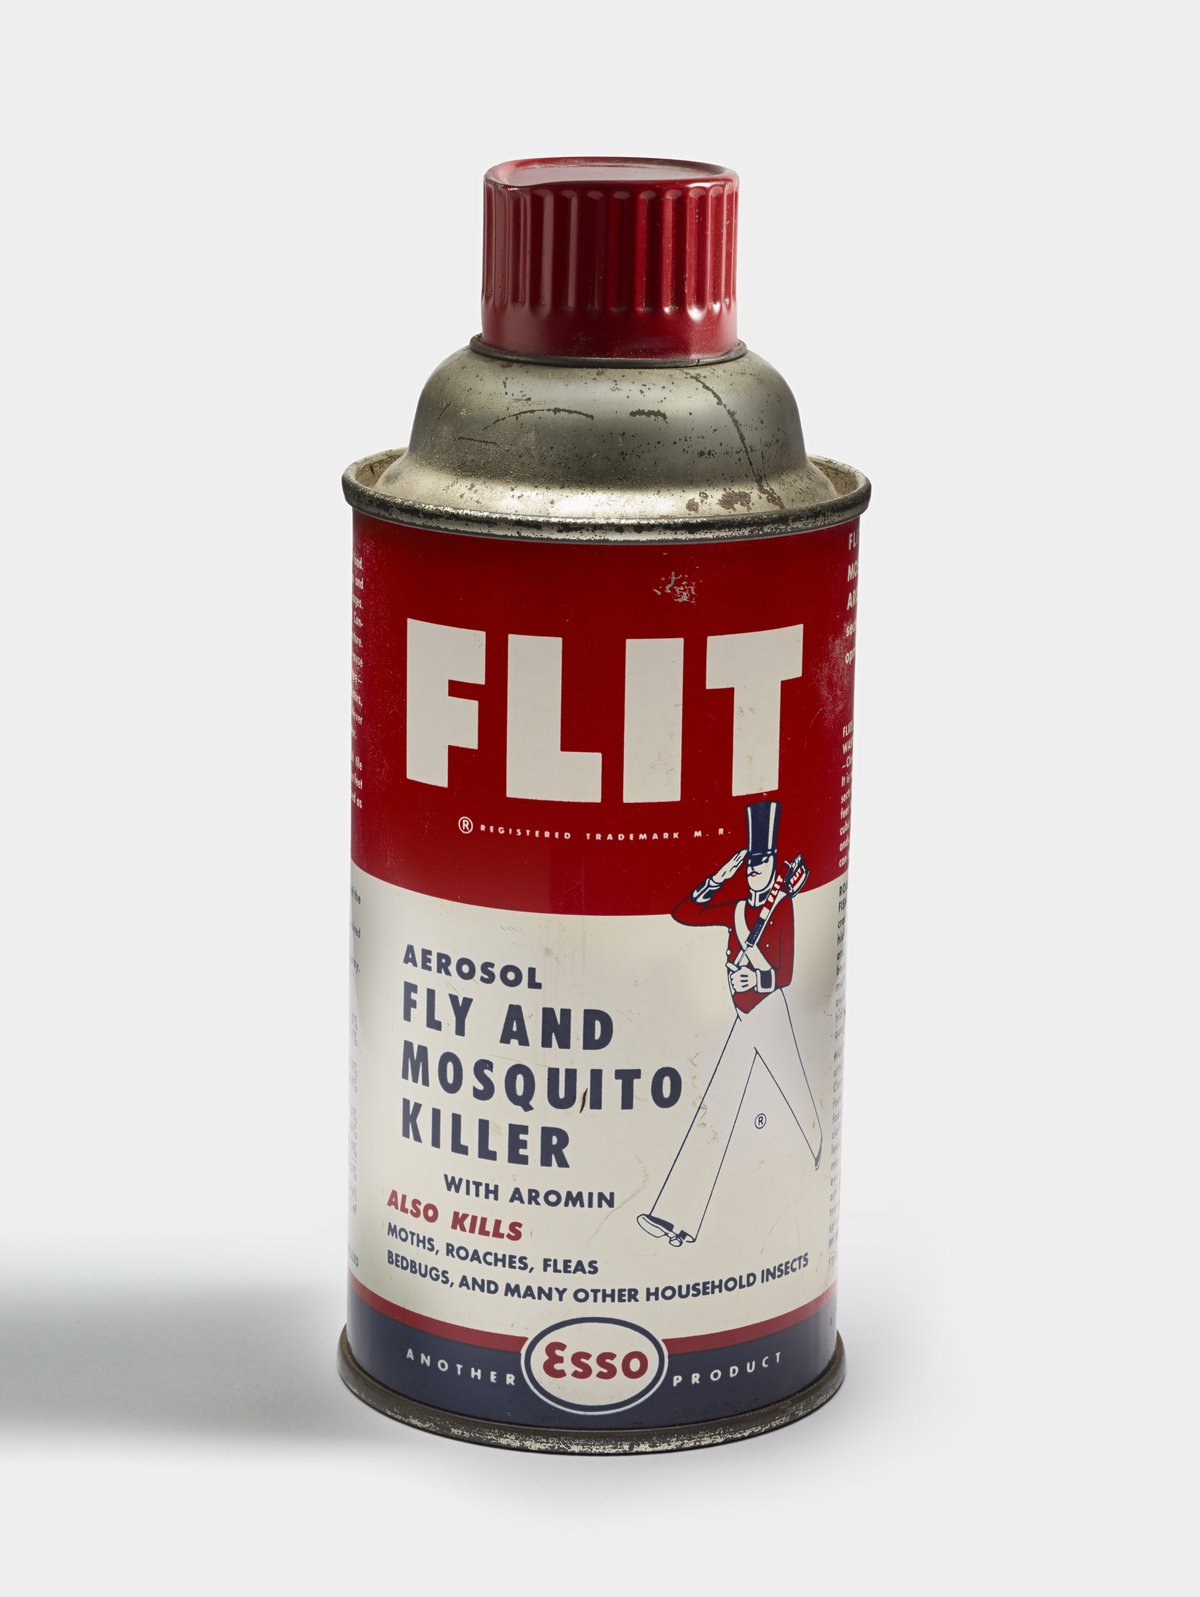 Flit Aerosol Fly and Mosquito Killer - Science History Institute Digital  Collections